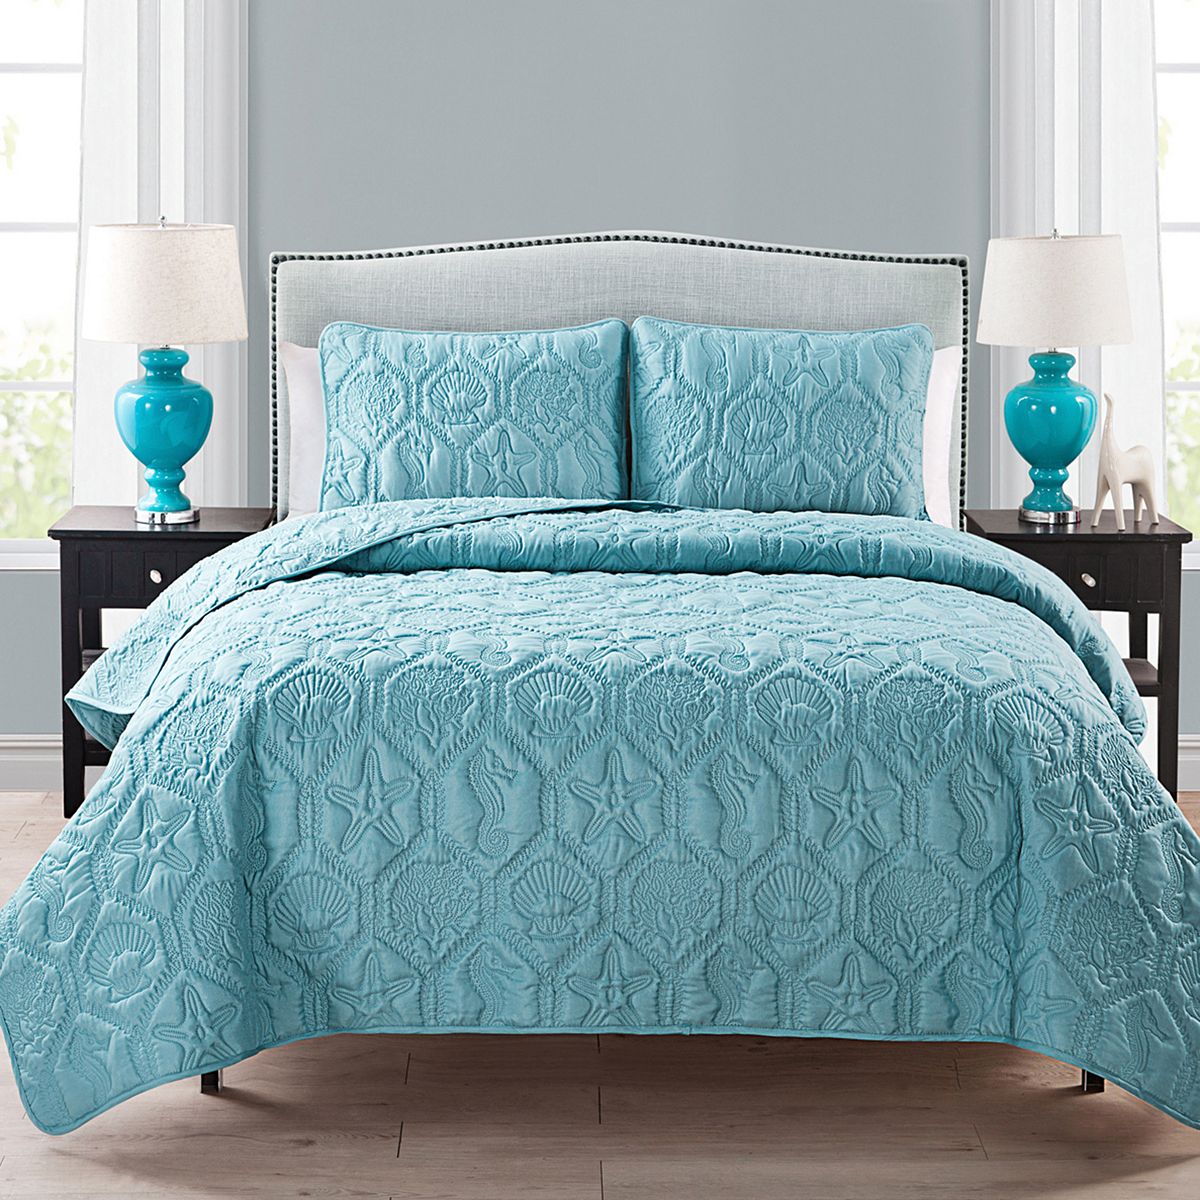 The Queen Size VCNY Home Shore Quilt Sets  $28.49